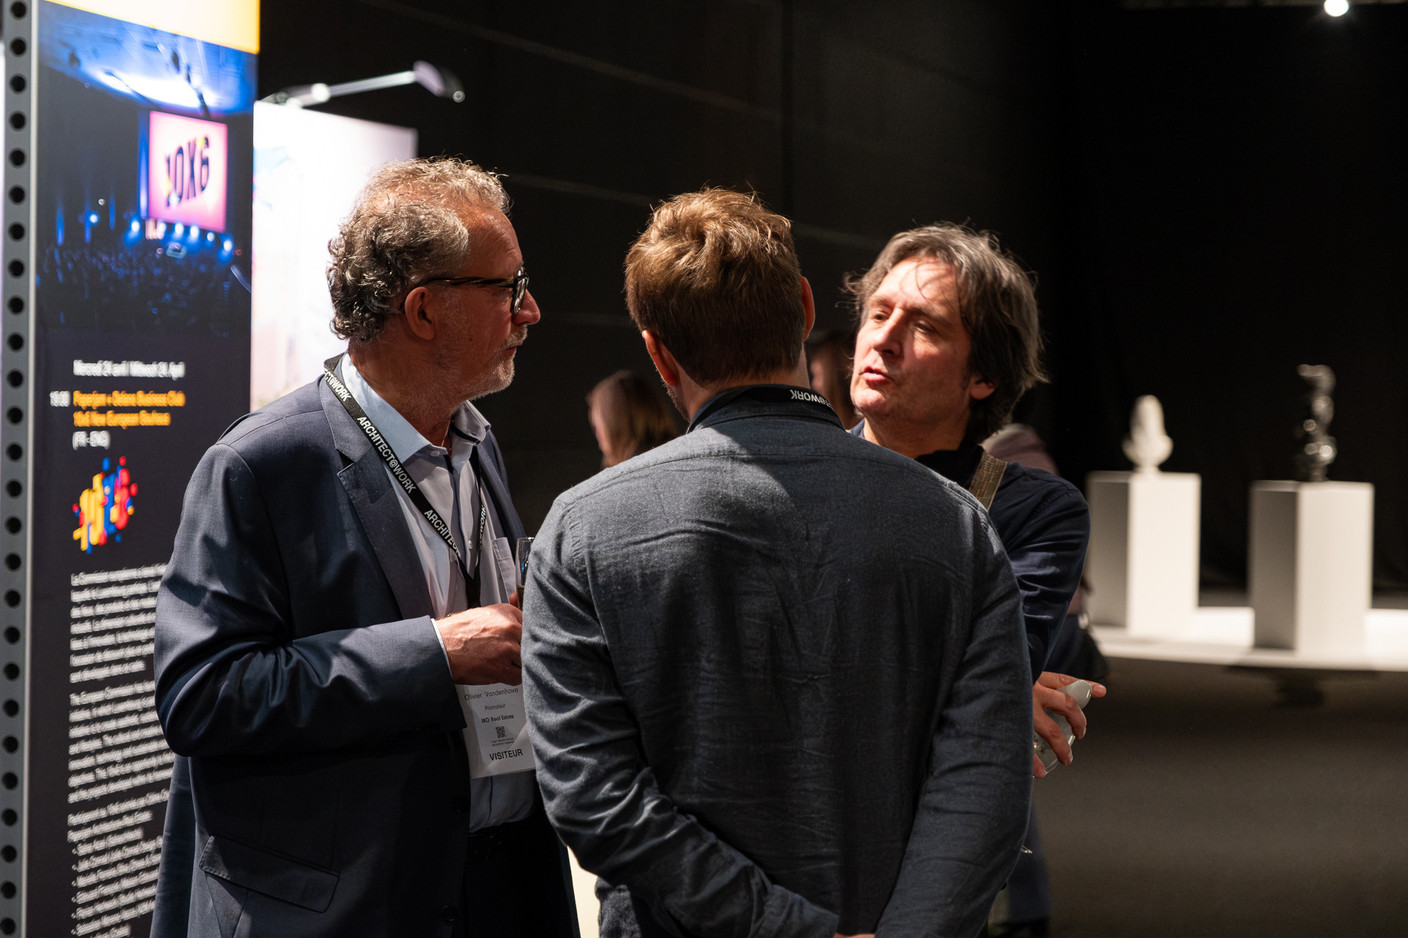 Olivier Vandenhove (IKO Real Estate), on the left. The 10x6 New European Bauhaus event on 24 April 2024 saw the launch of the Paperjam Architecture+Real Estate special issue and the presentation of the Paperjam Unusual Suspects magazine. Photo: Laurent Sturm